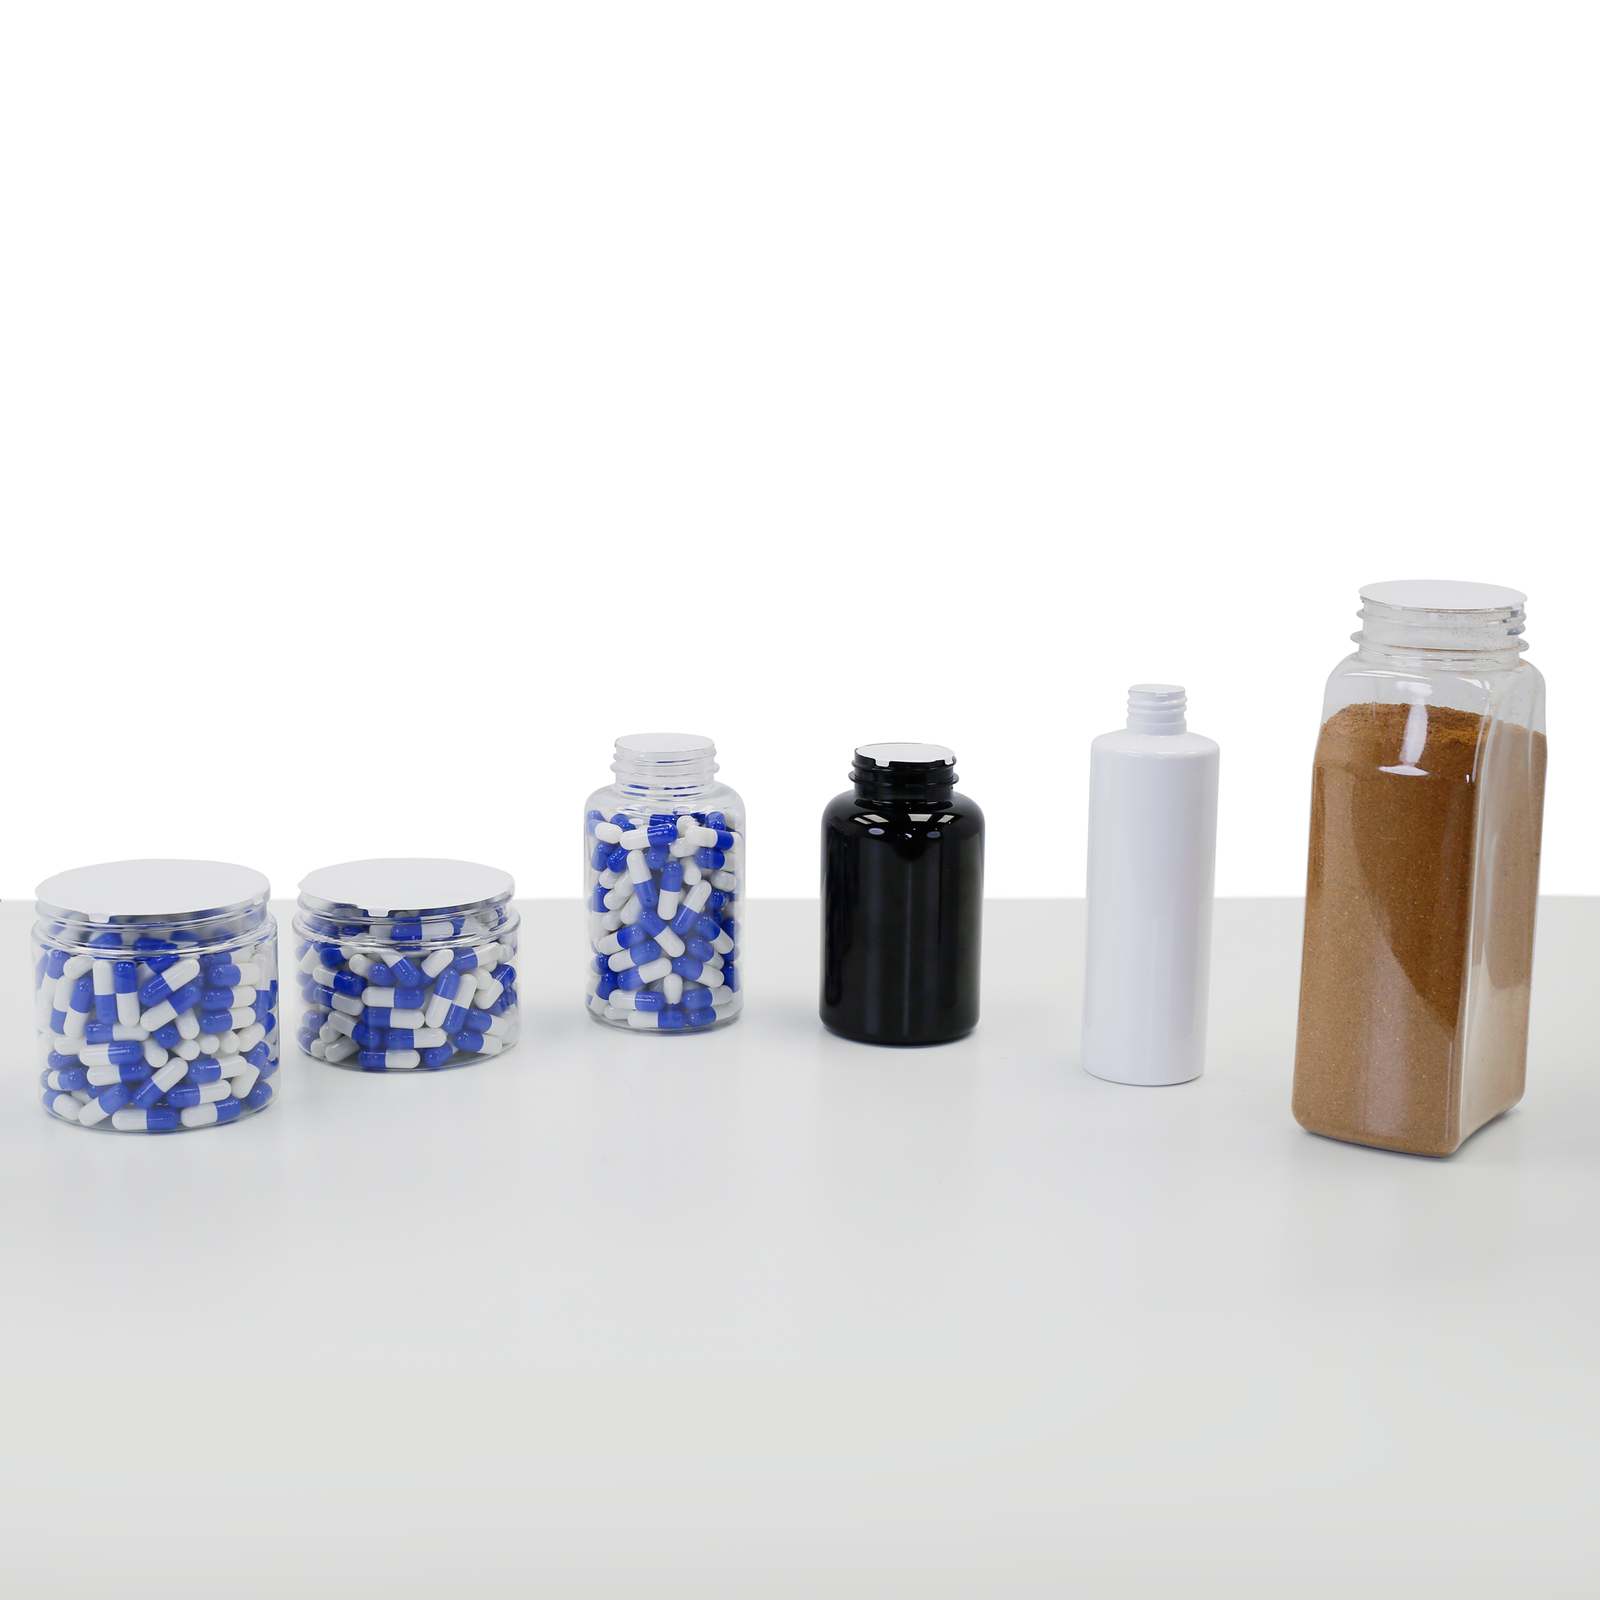 Image showing different size of plastic containers with the liner placed on top without the cap